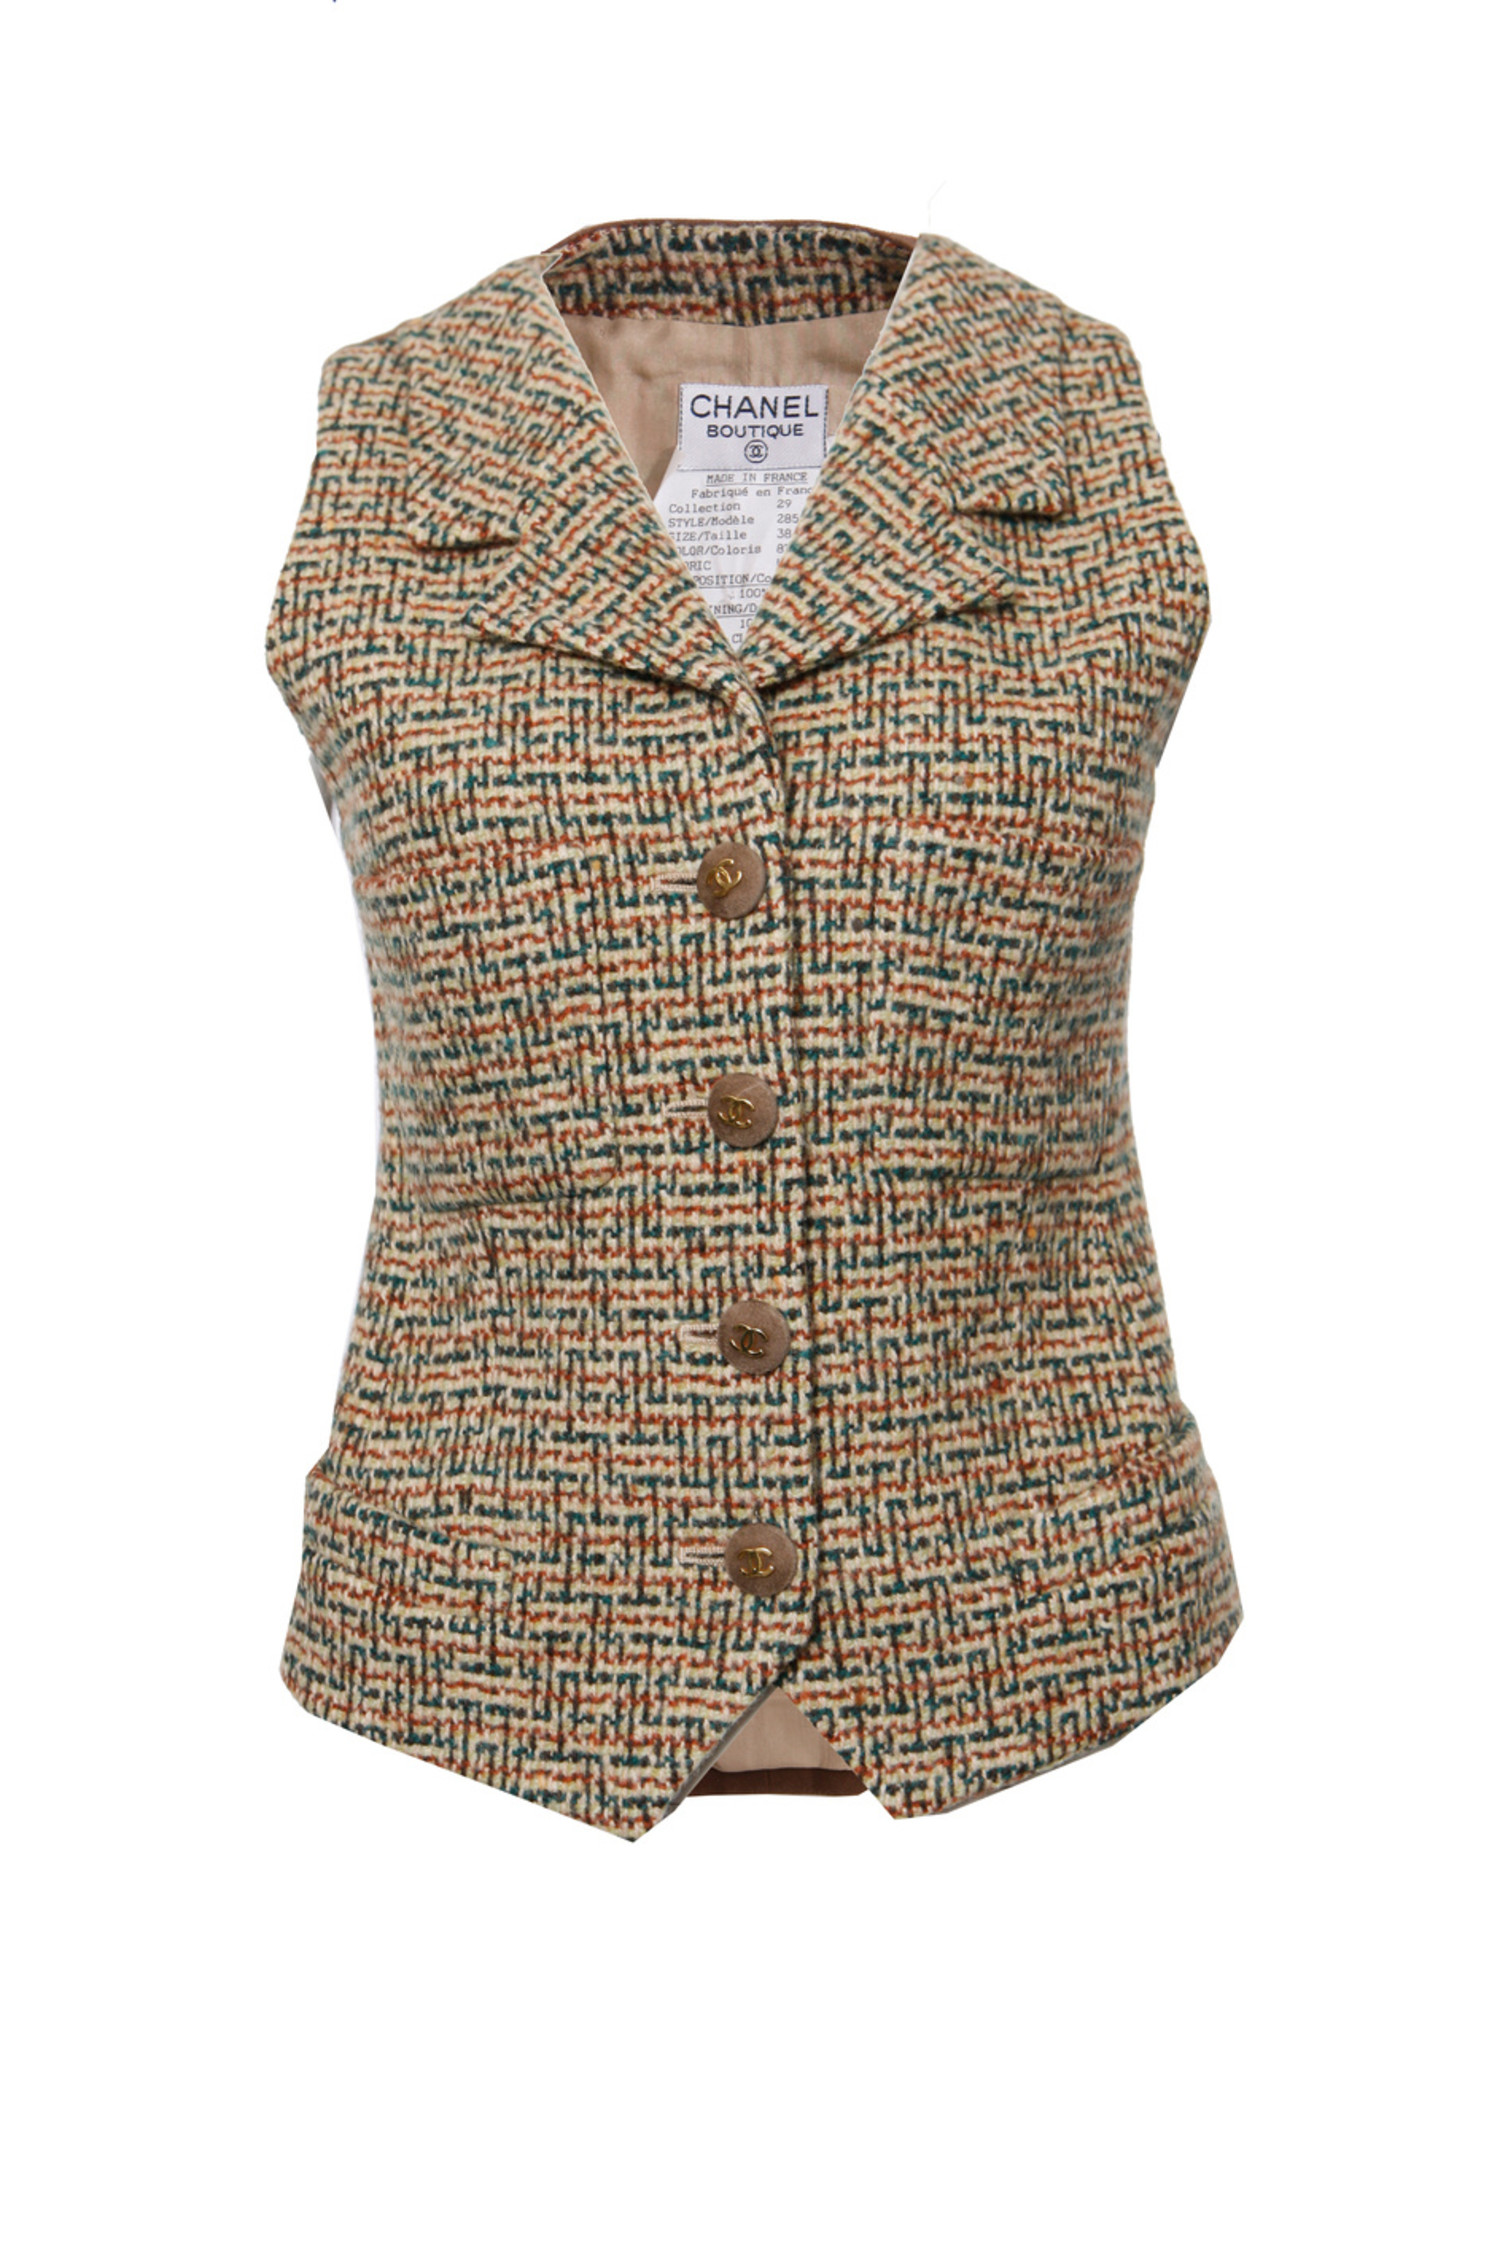 Chanel, waistcoat with suede details and buttons. - Unique